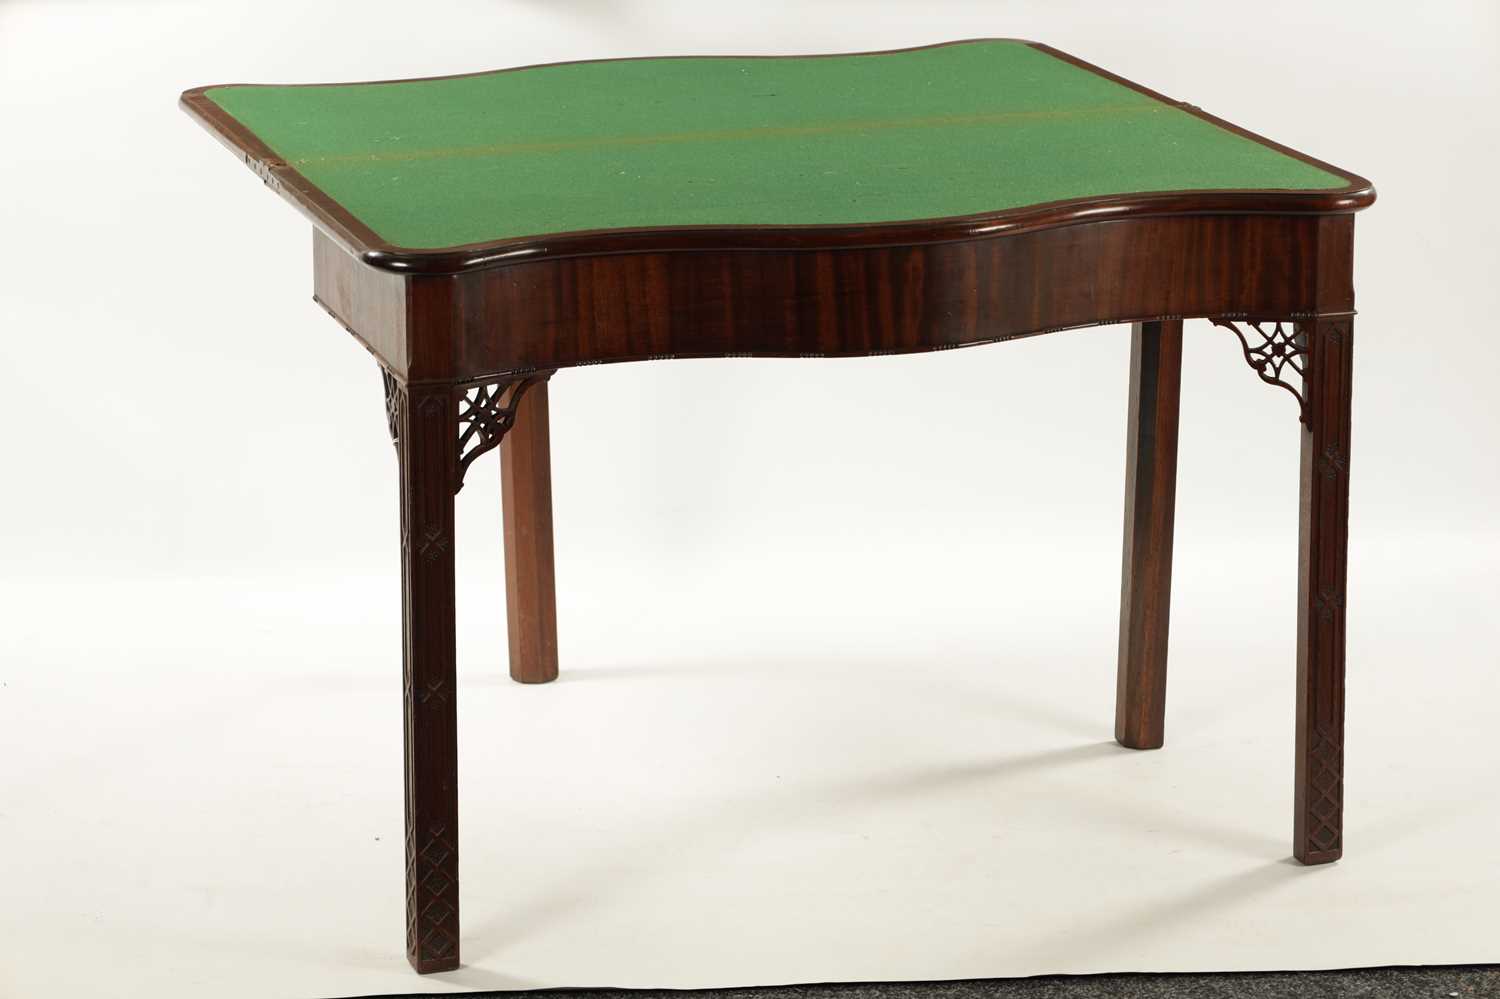 A FINE OVERSIZED GEROGE III SERPENTINE MAHOGANY TEA-TABLE IN THE MANNER OF THOMAS CHIPPENDALE - Image 7 of 8